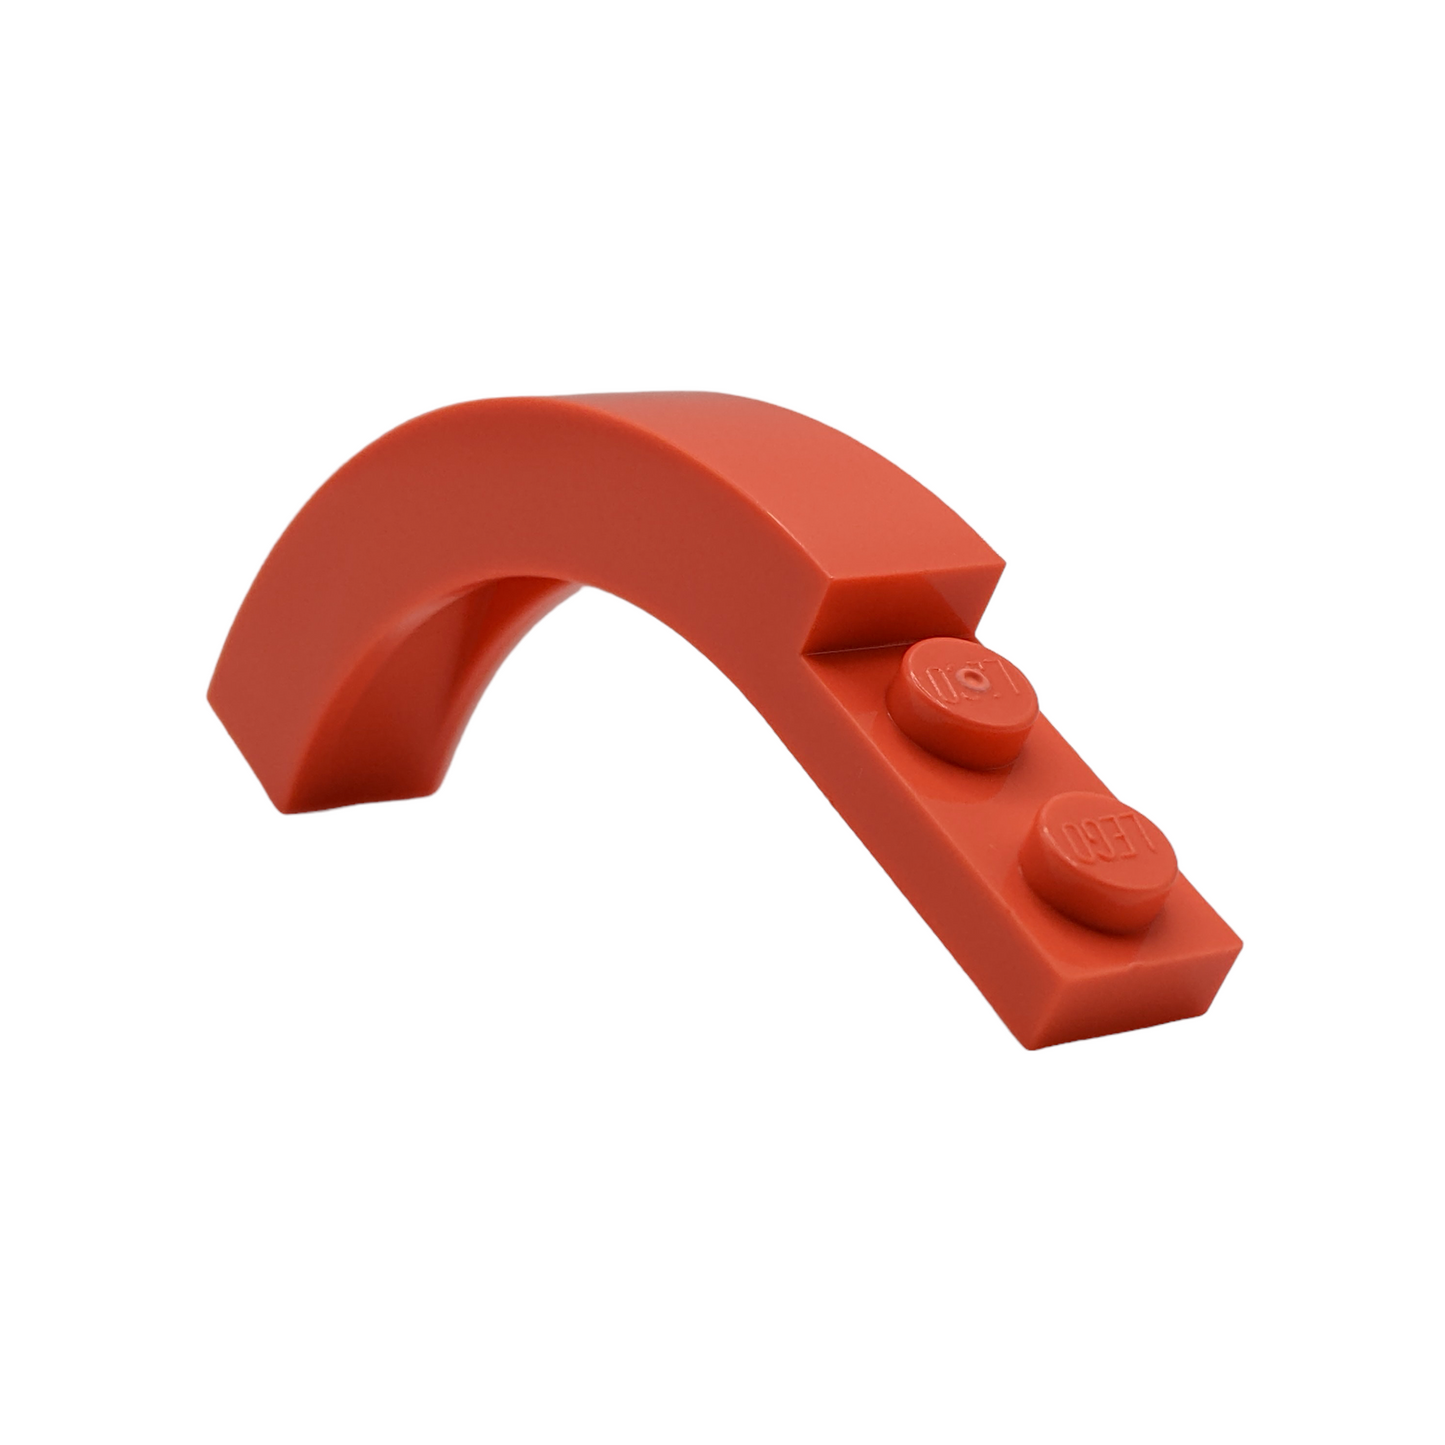 LEGO Arch 1x6x3 1/2 Curved Top - in Coral